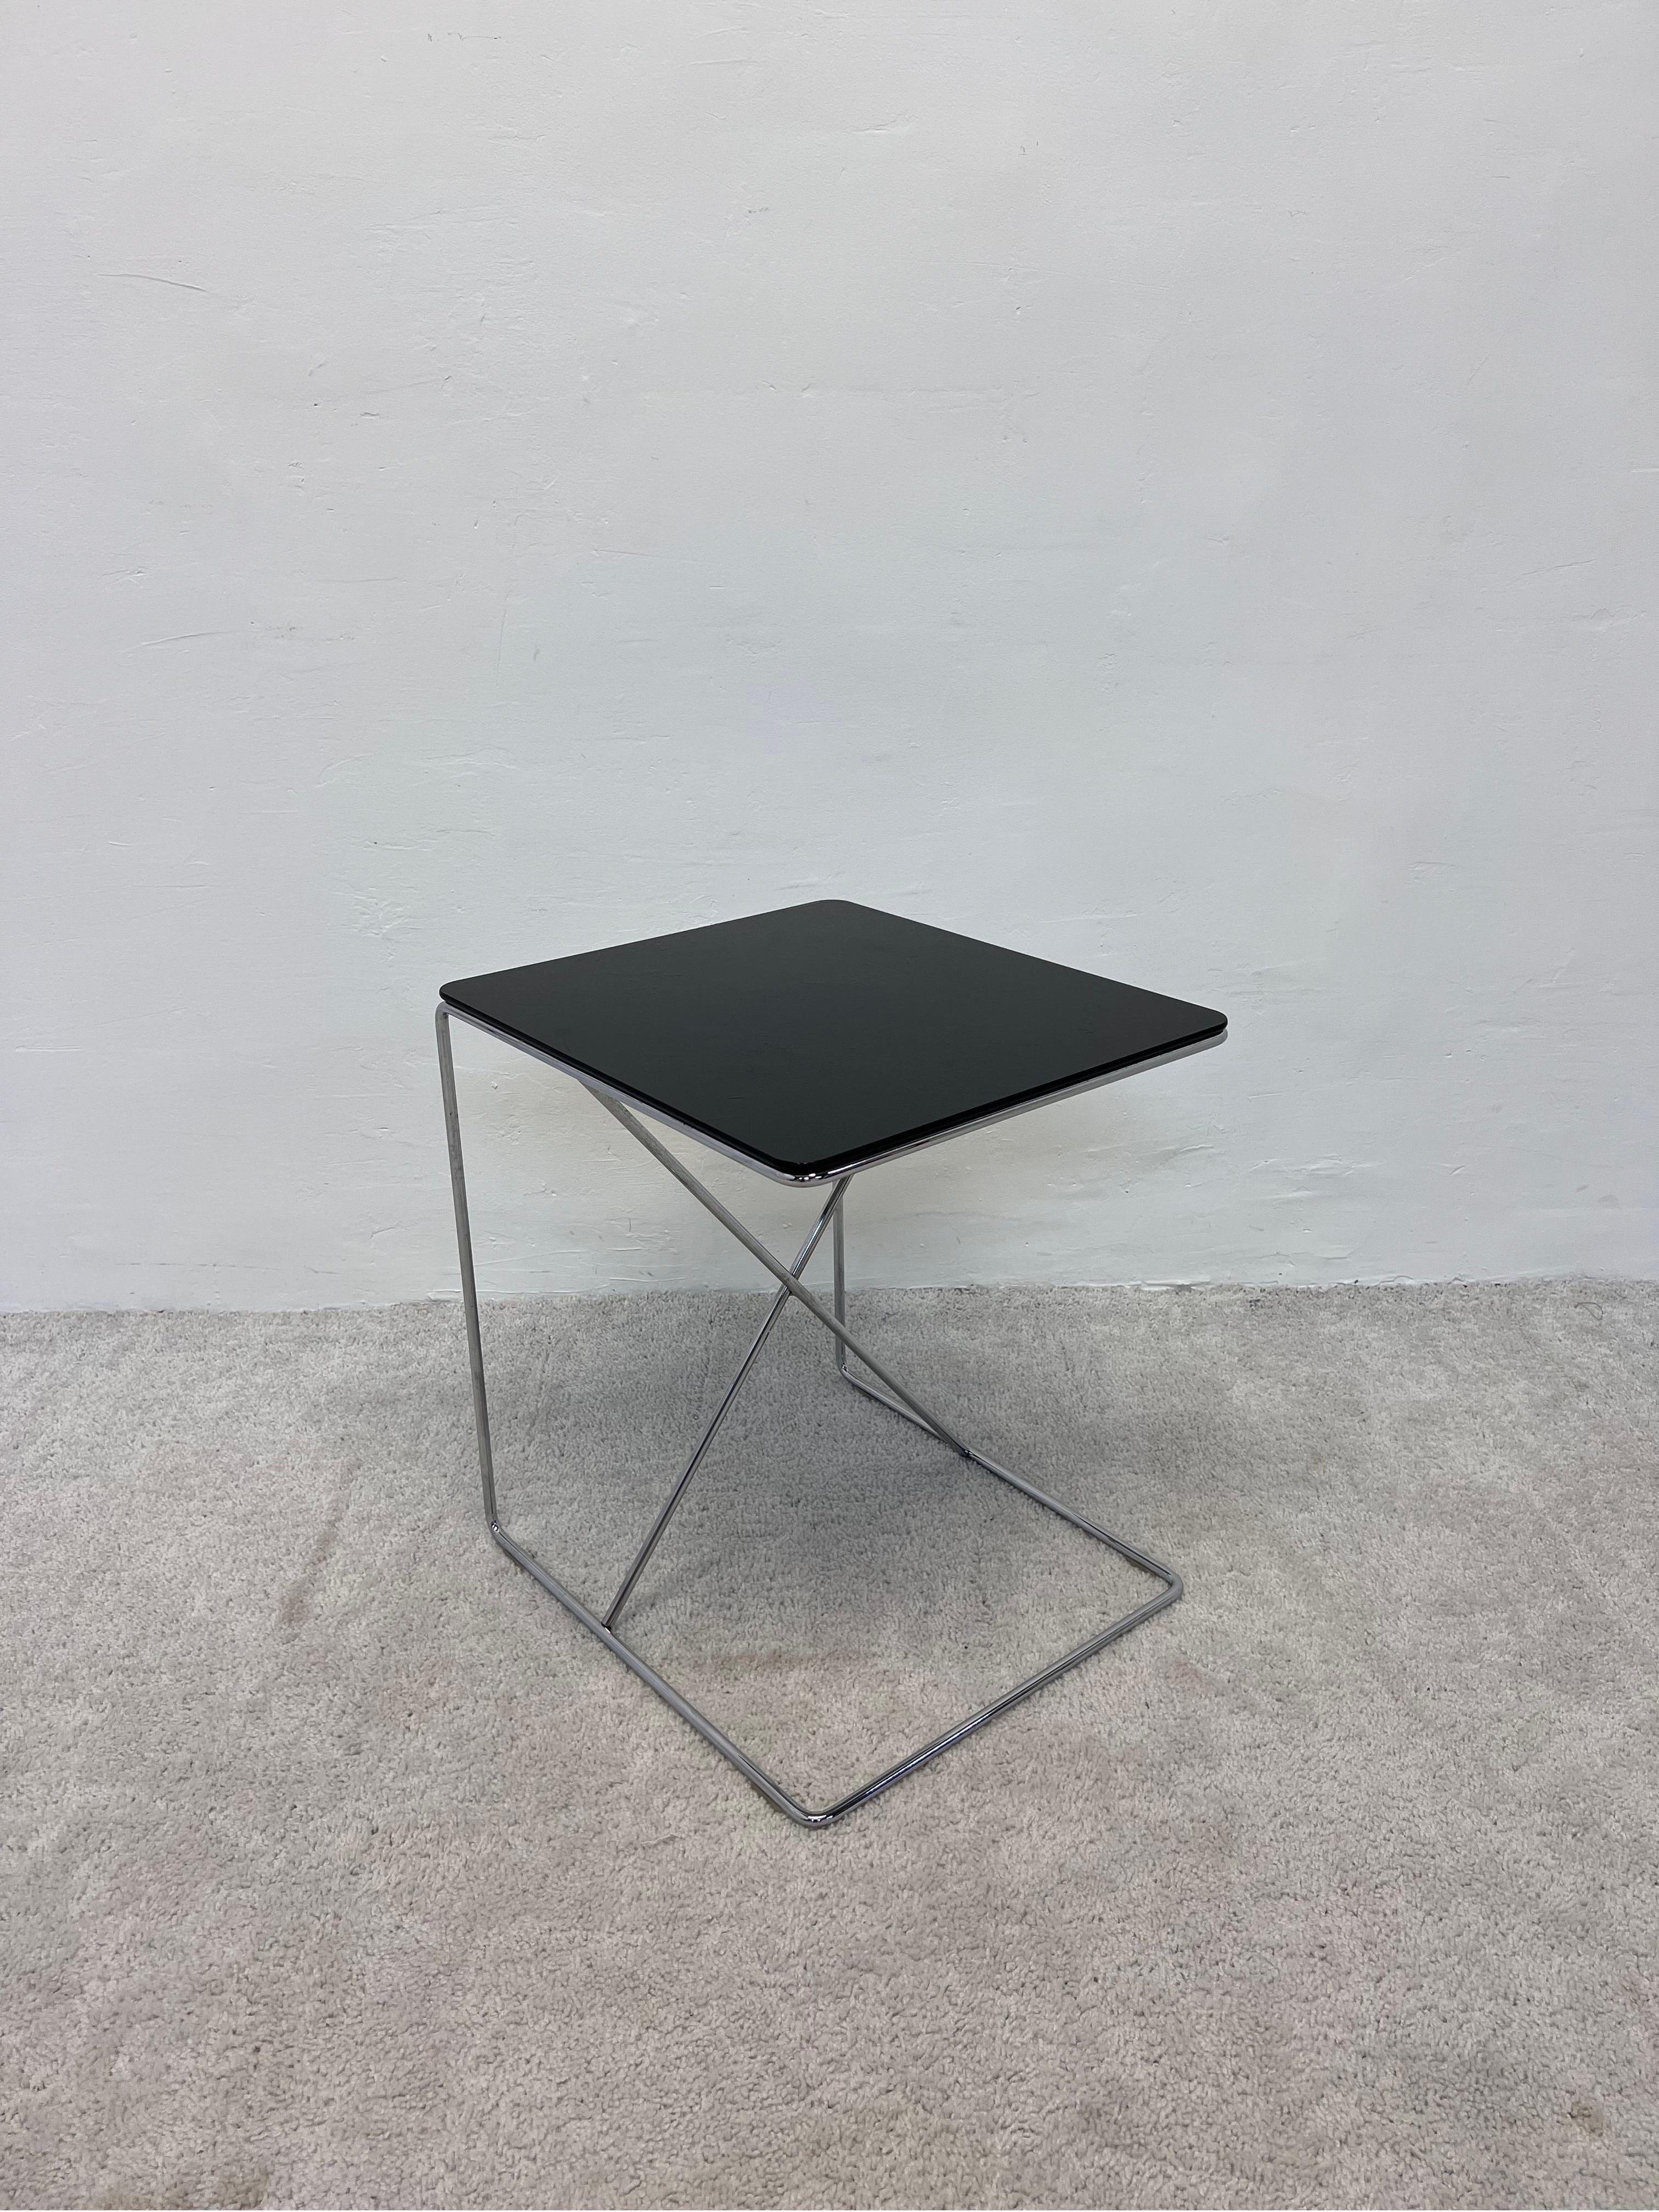 Smoked glass top on chrome plated wire frame side table by B&B Italia, 1980s.